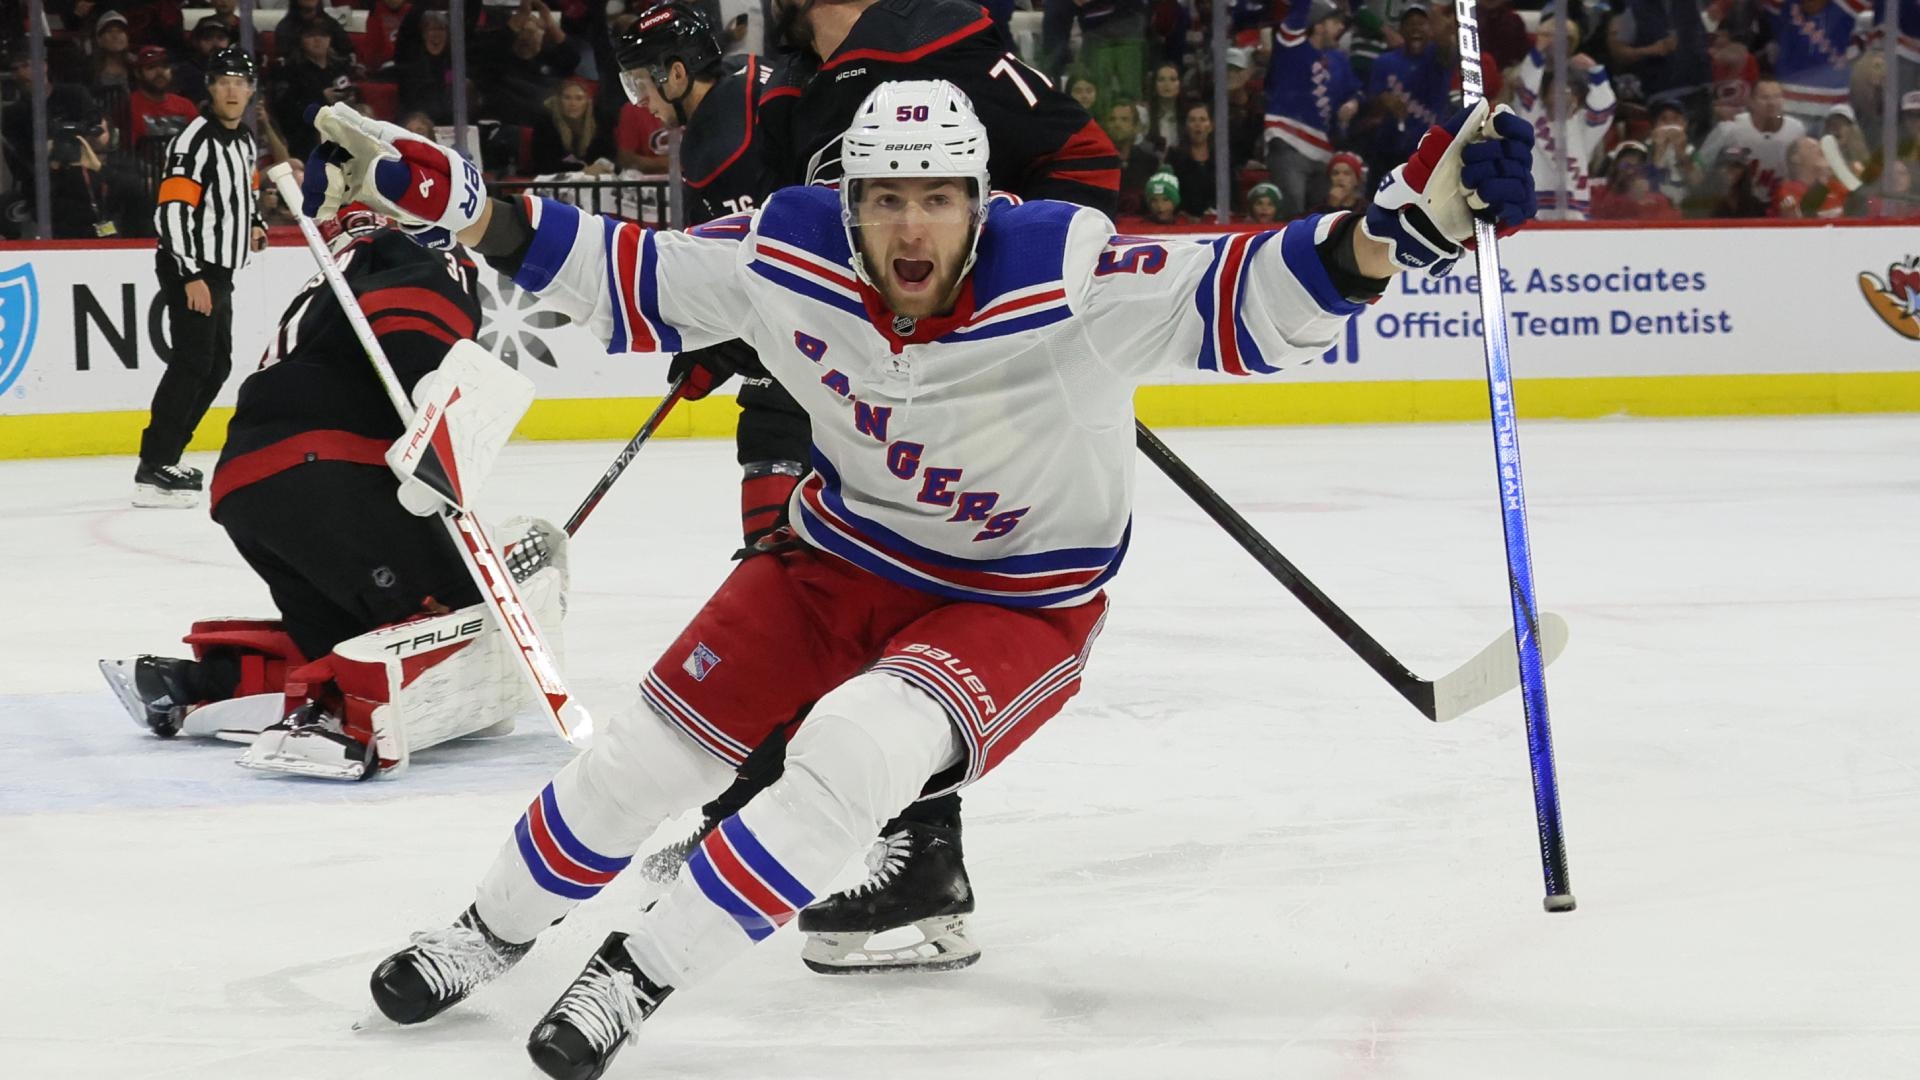 Will Cuylle buries a quick wrister for Rangers